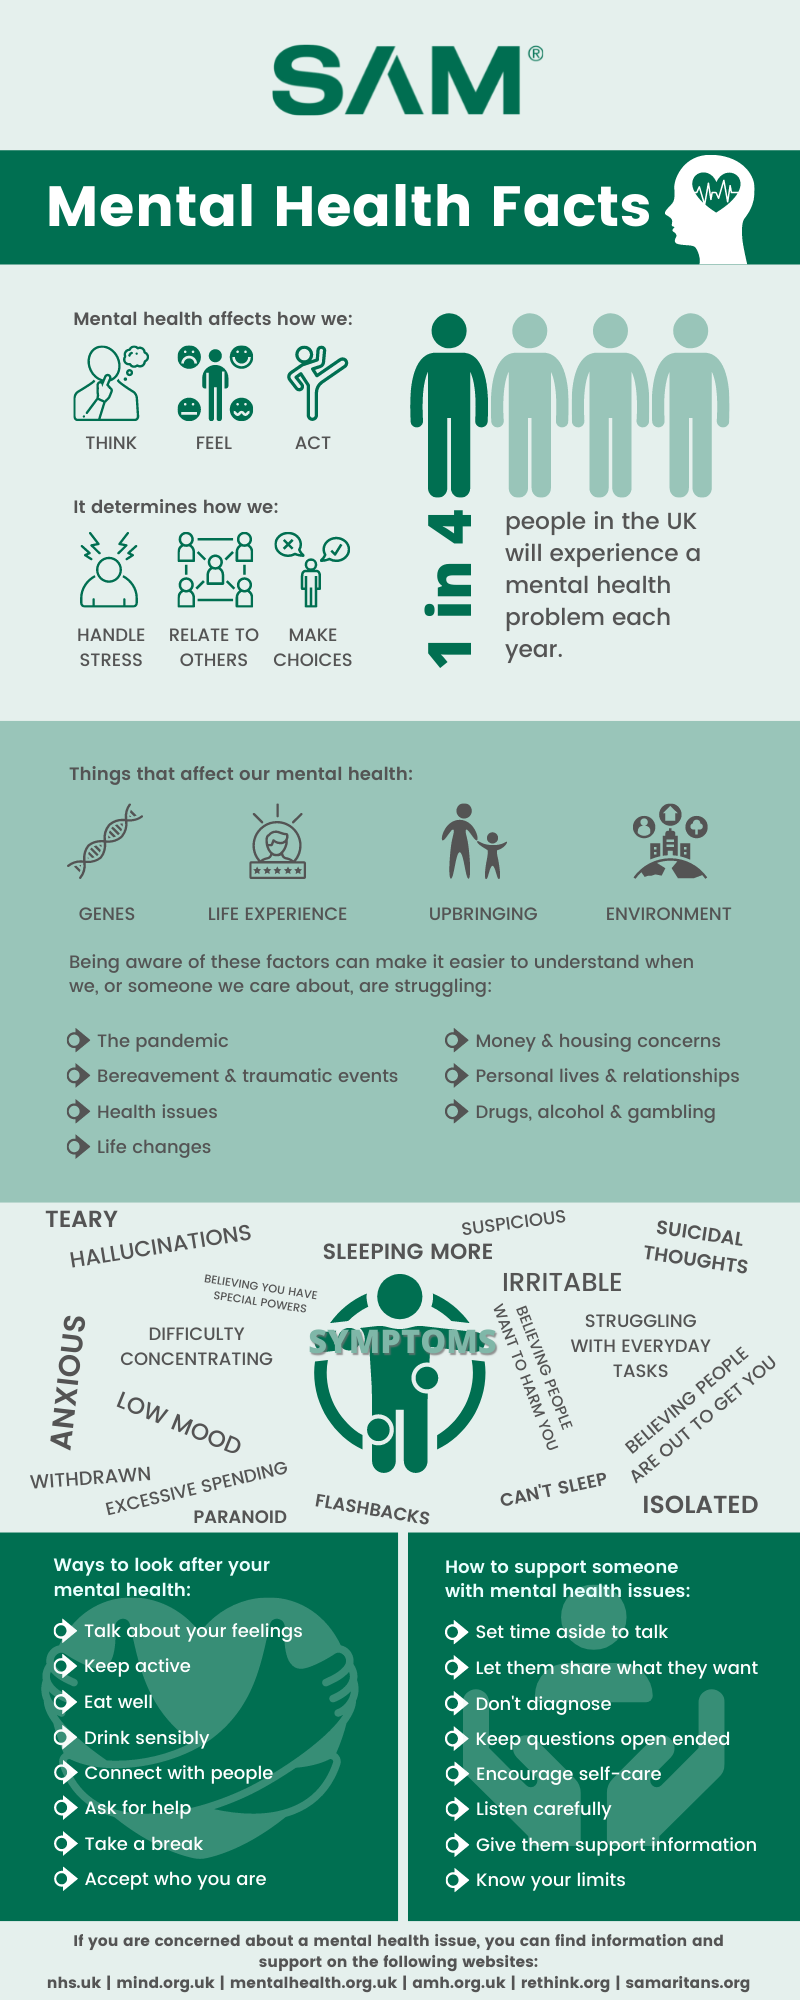 SAM Mental Health Facts Infographic